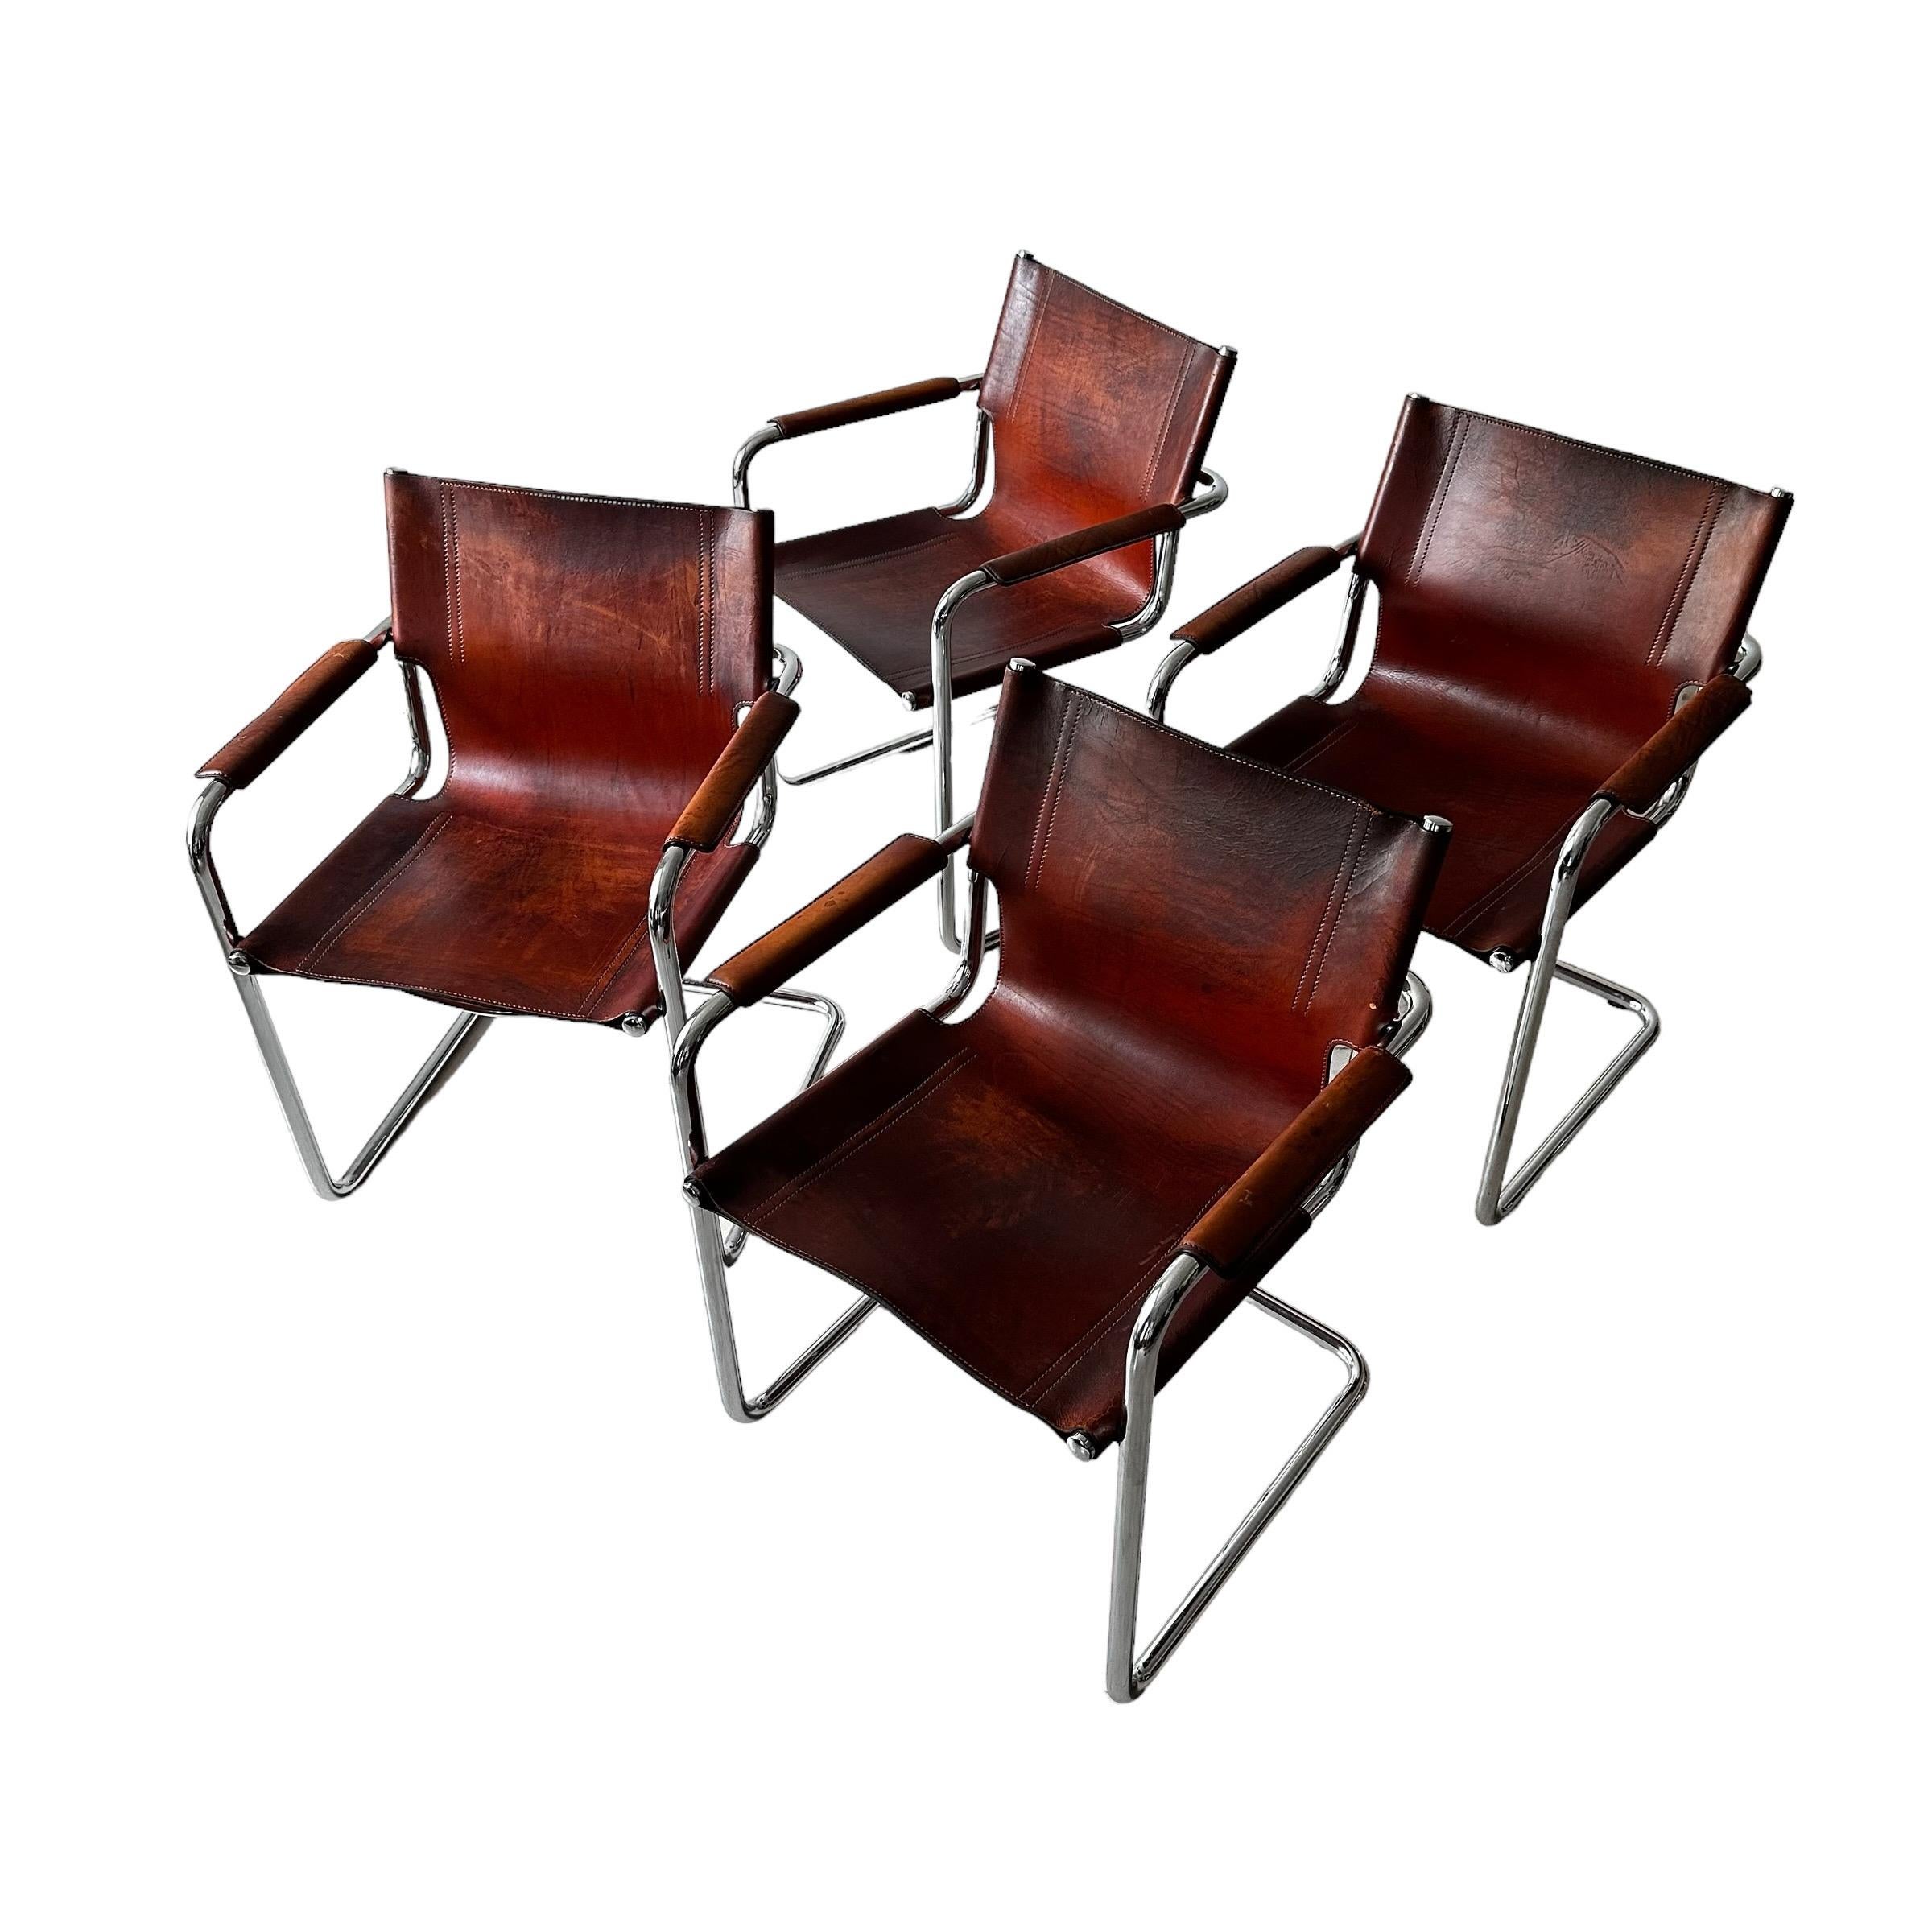 Italian Matteo Grassi, Set of 4 Armchairs in Patinated Cognac Leather, Italy 1970s For Sale